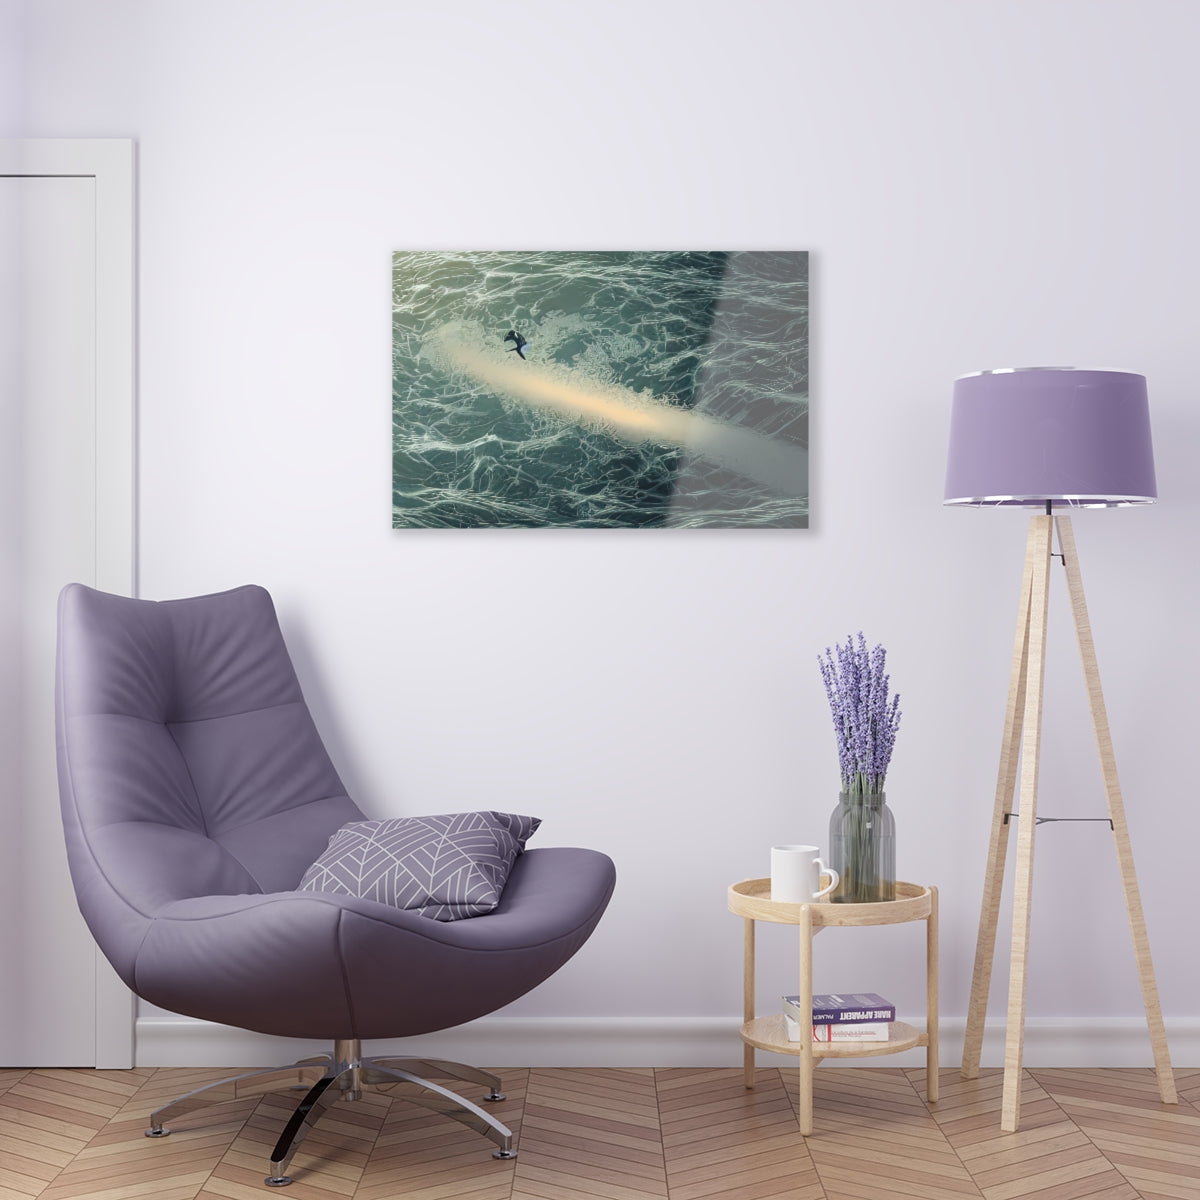 Acrylic Print | Above The Wave